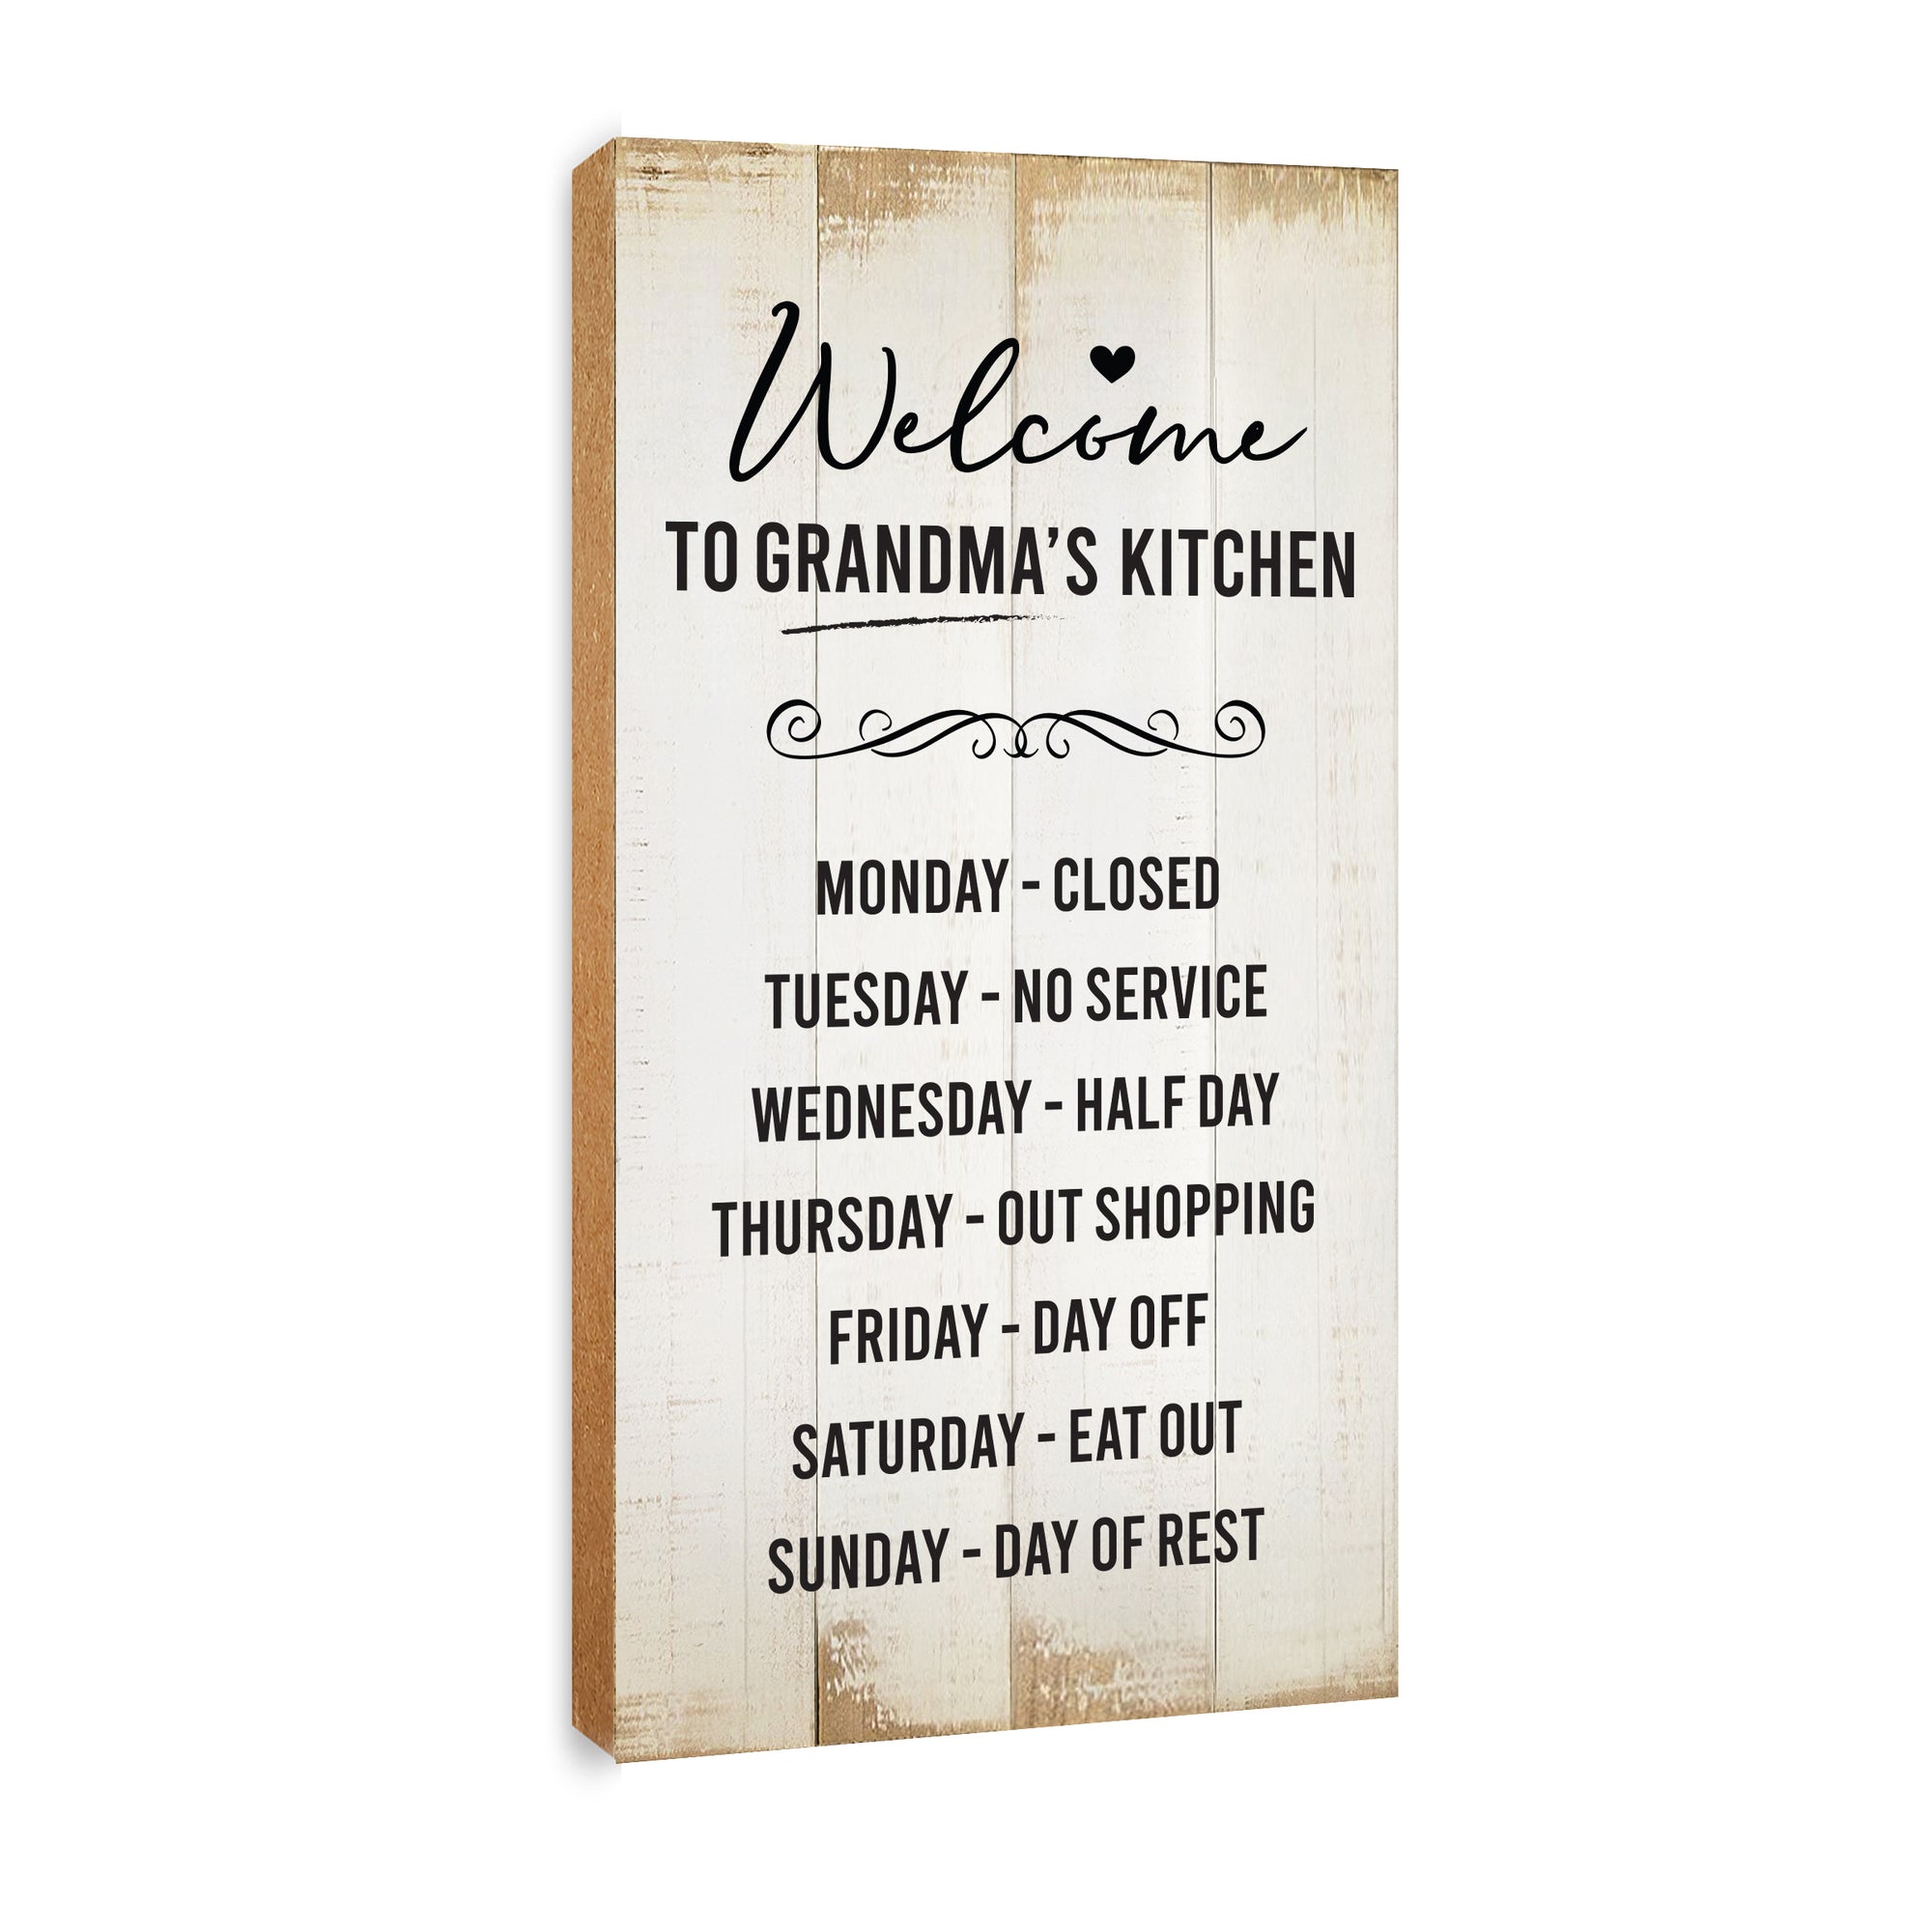 Vintage-inspired kitchen wall plaque for stylish home decor.